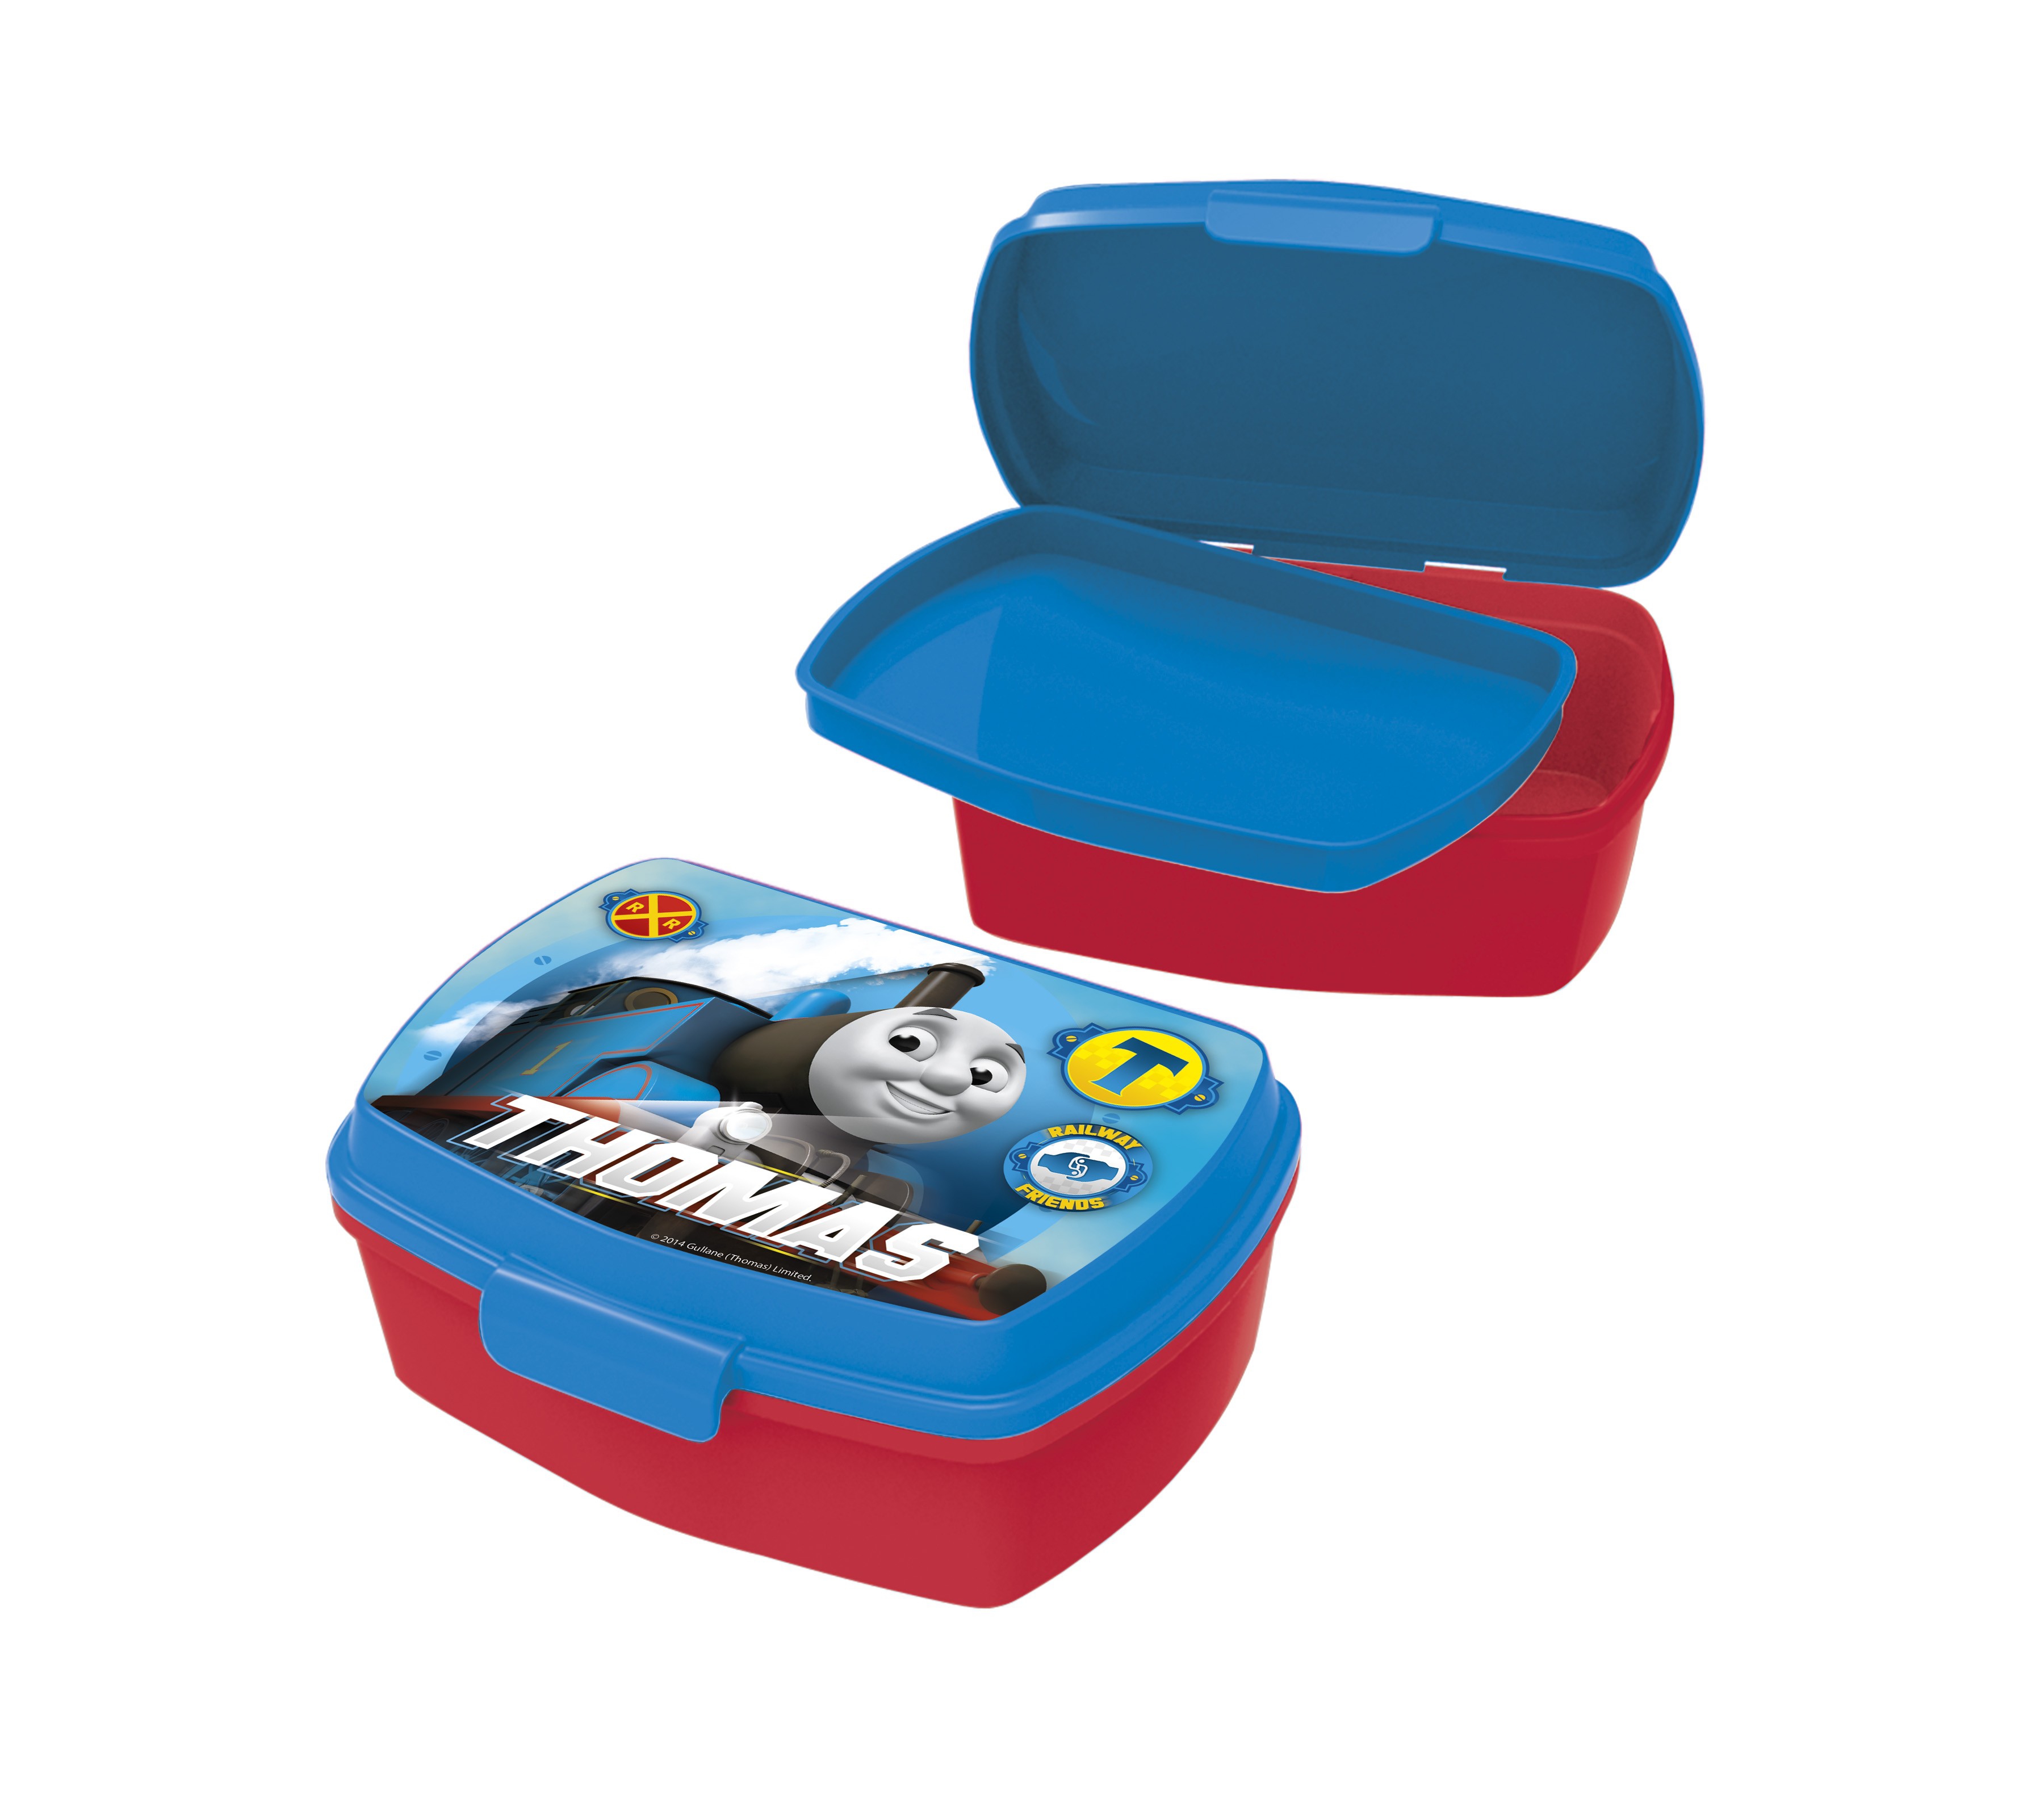 Thomas The Tank Engine 'with Tray' School Sandwich Box Lunch